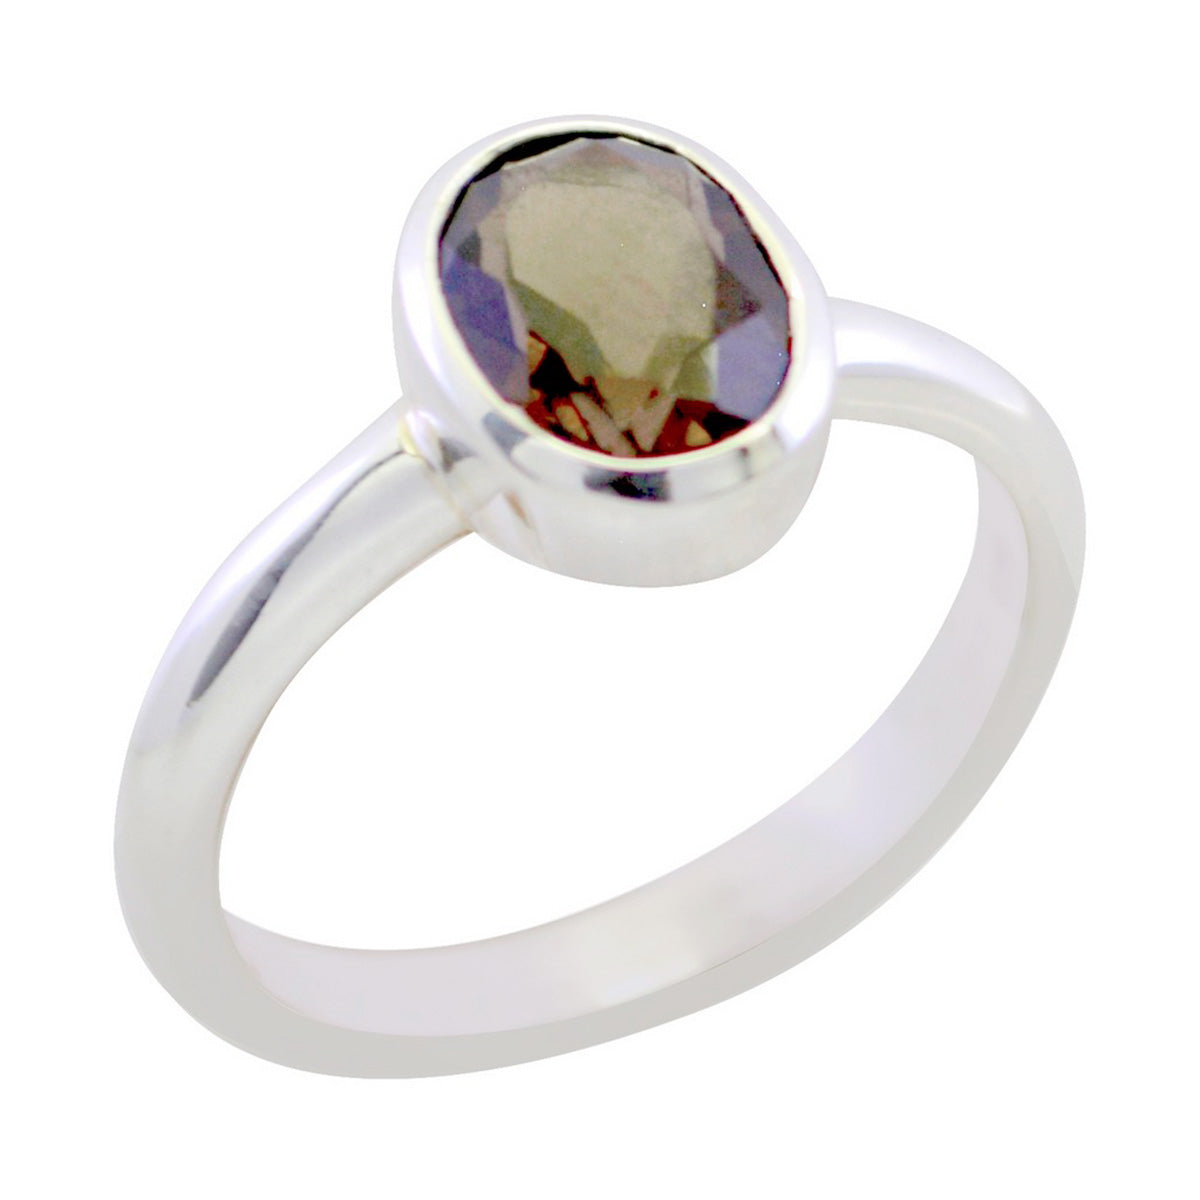 Well-Formed Gemstones Smoky Quartz 925 Silver Rings Jewelry King